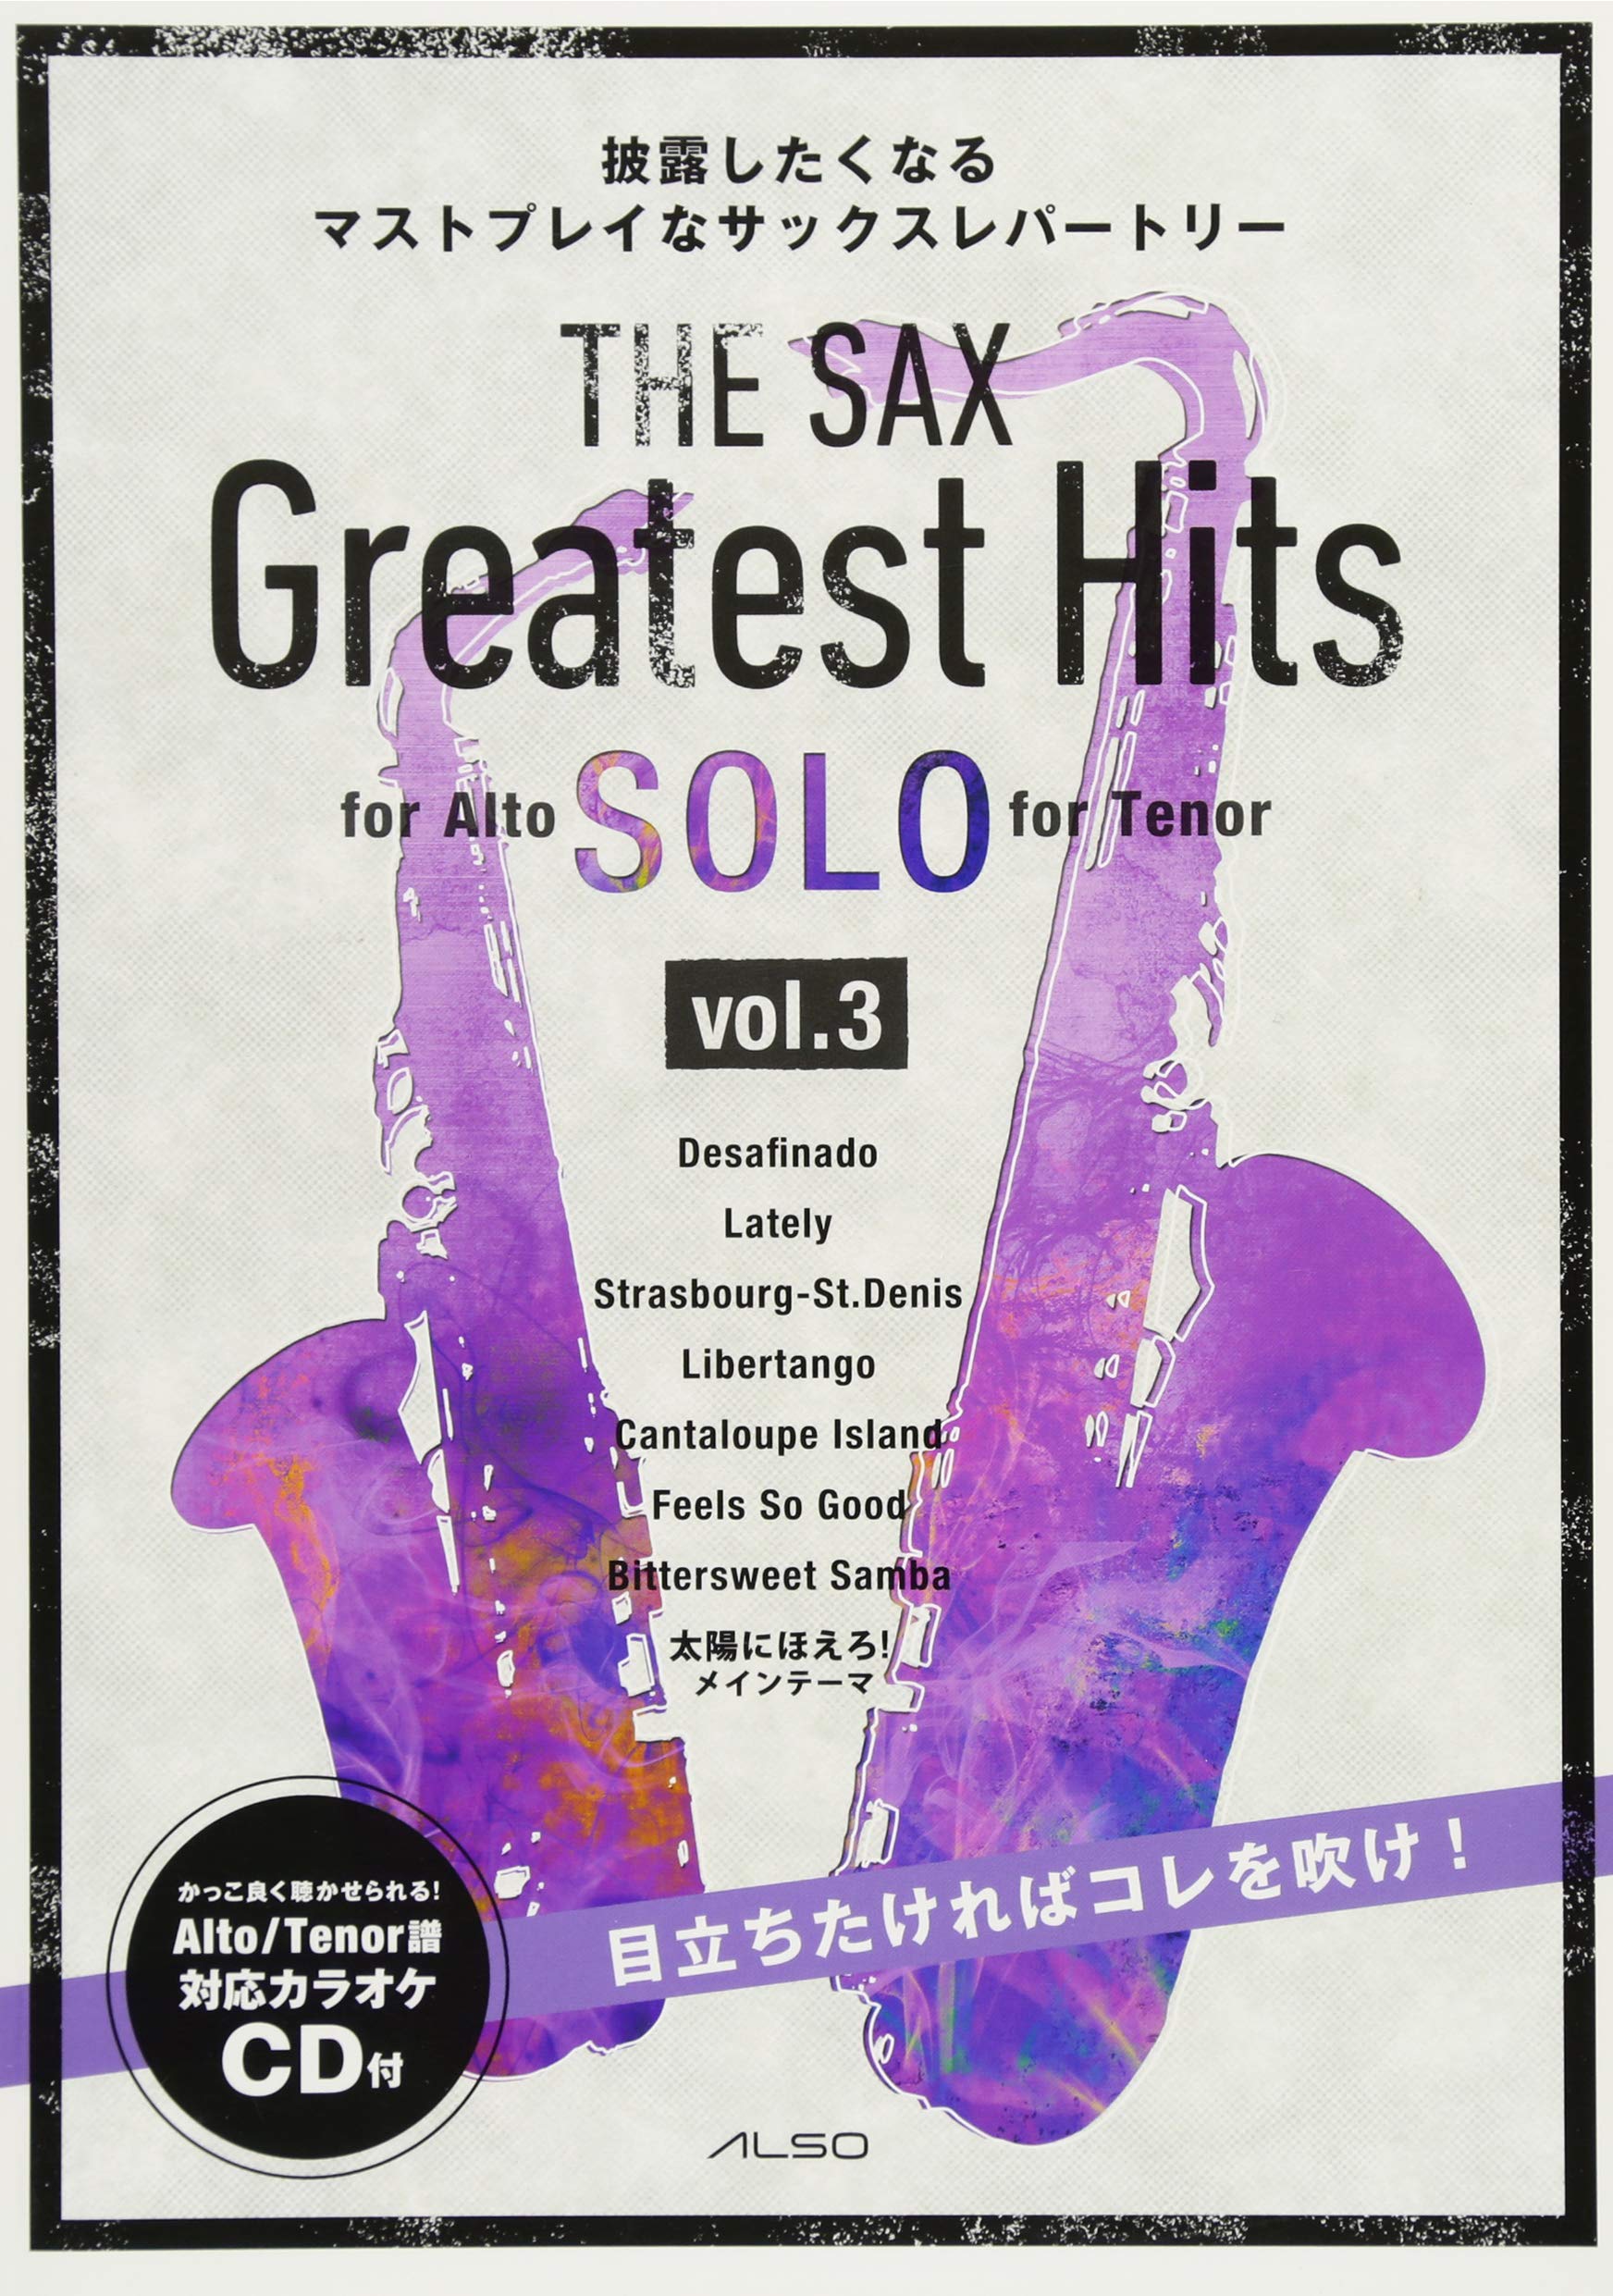 THE SAX Greatest Hits vol.3 for Saxophone Solo w/CD